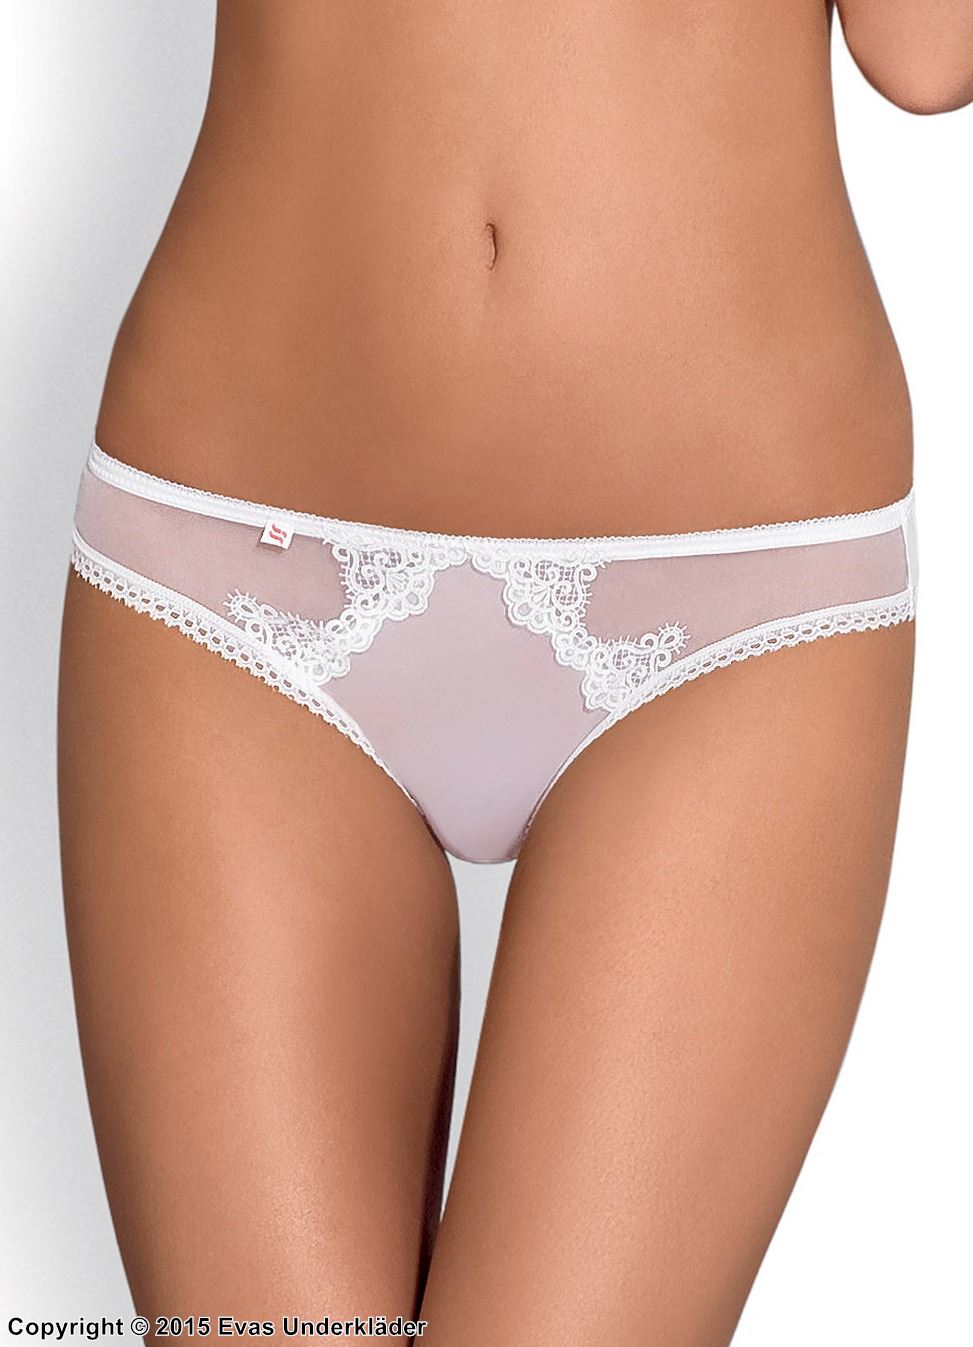 Sheer panty with cute lace details